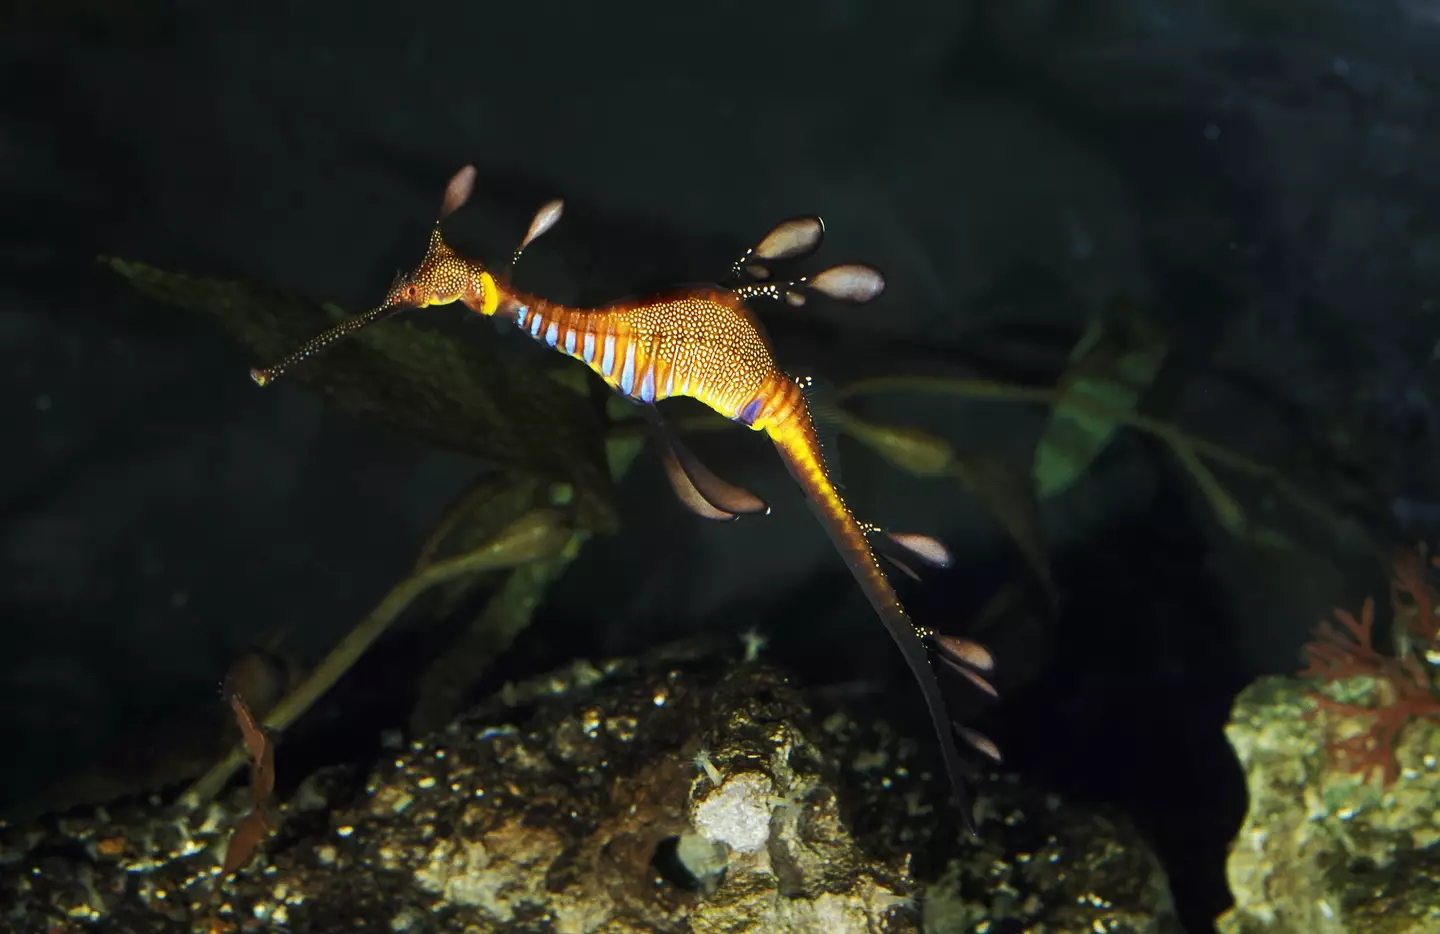 Seadragons have been found washed up on the shores of Australian beaches after a period of heavy rainfall.